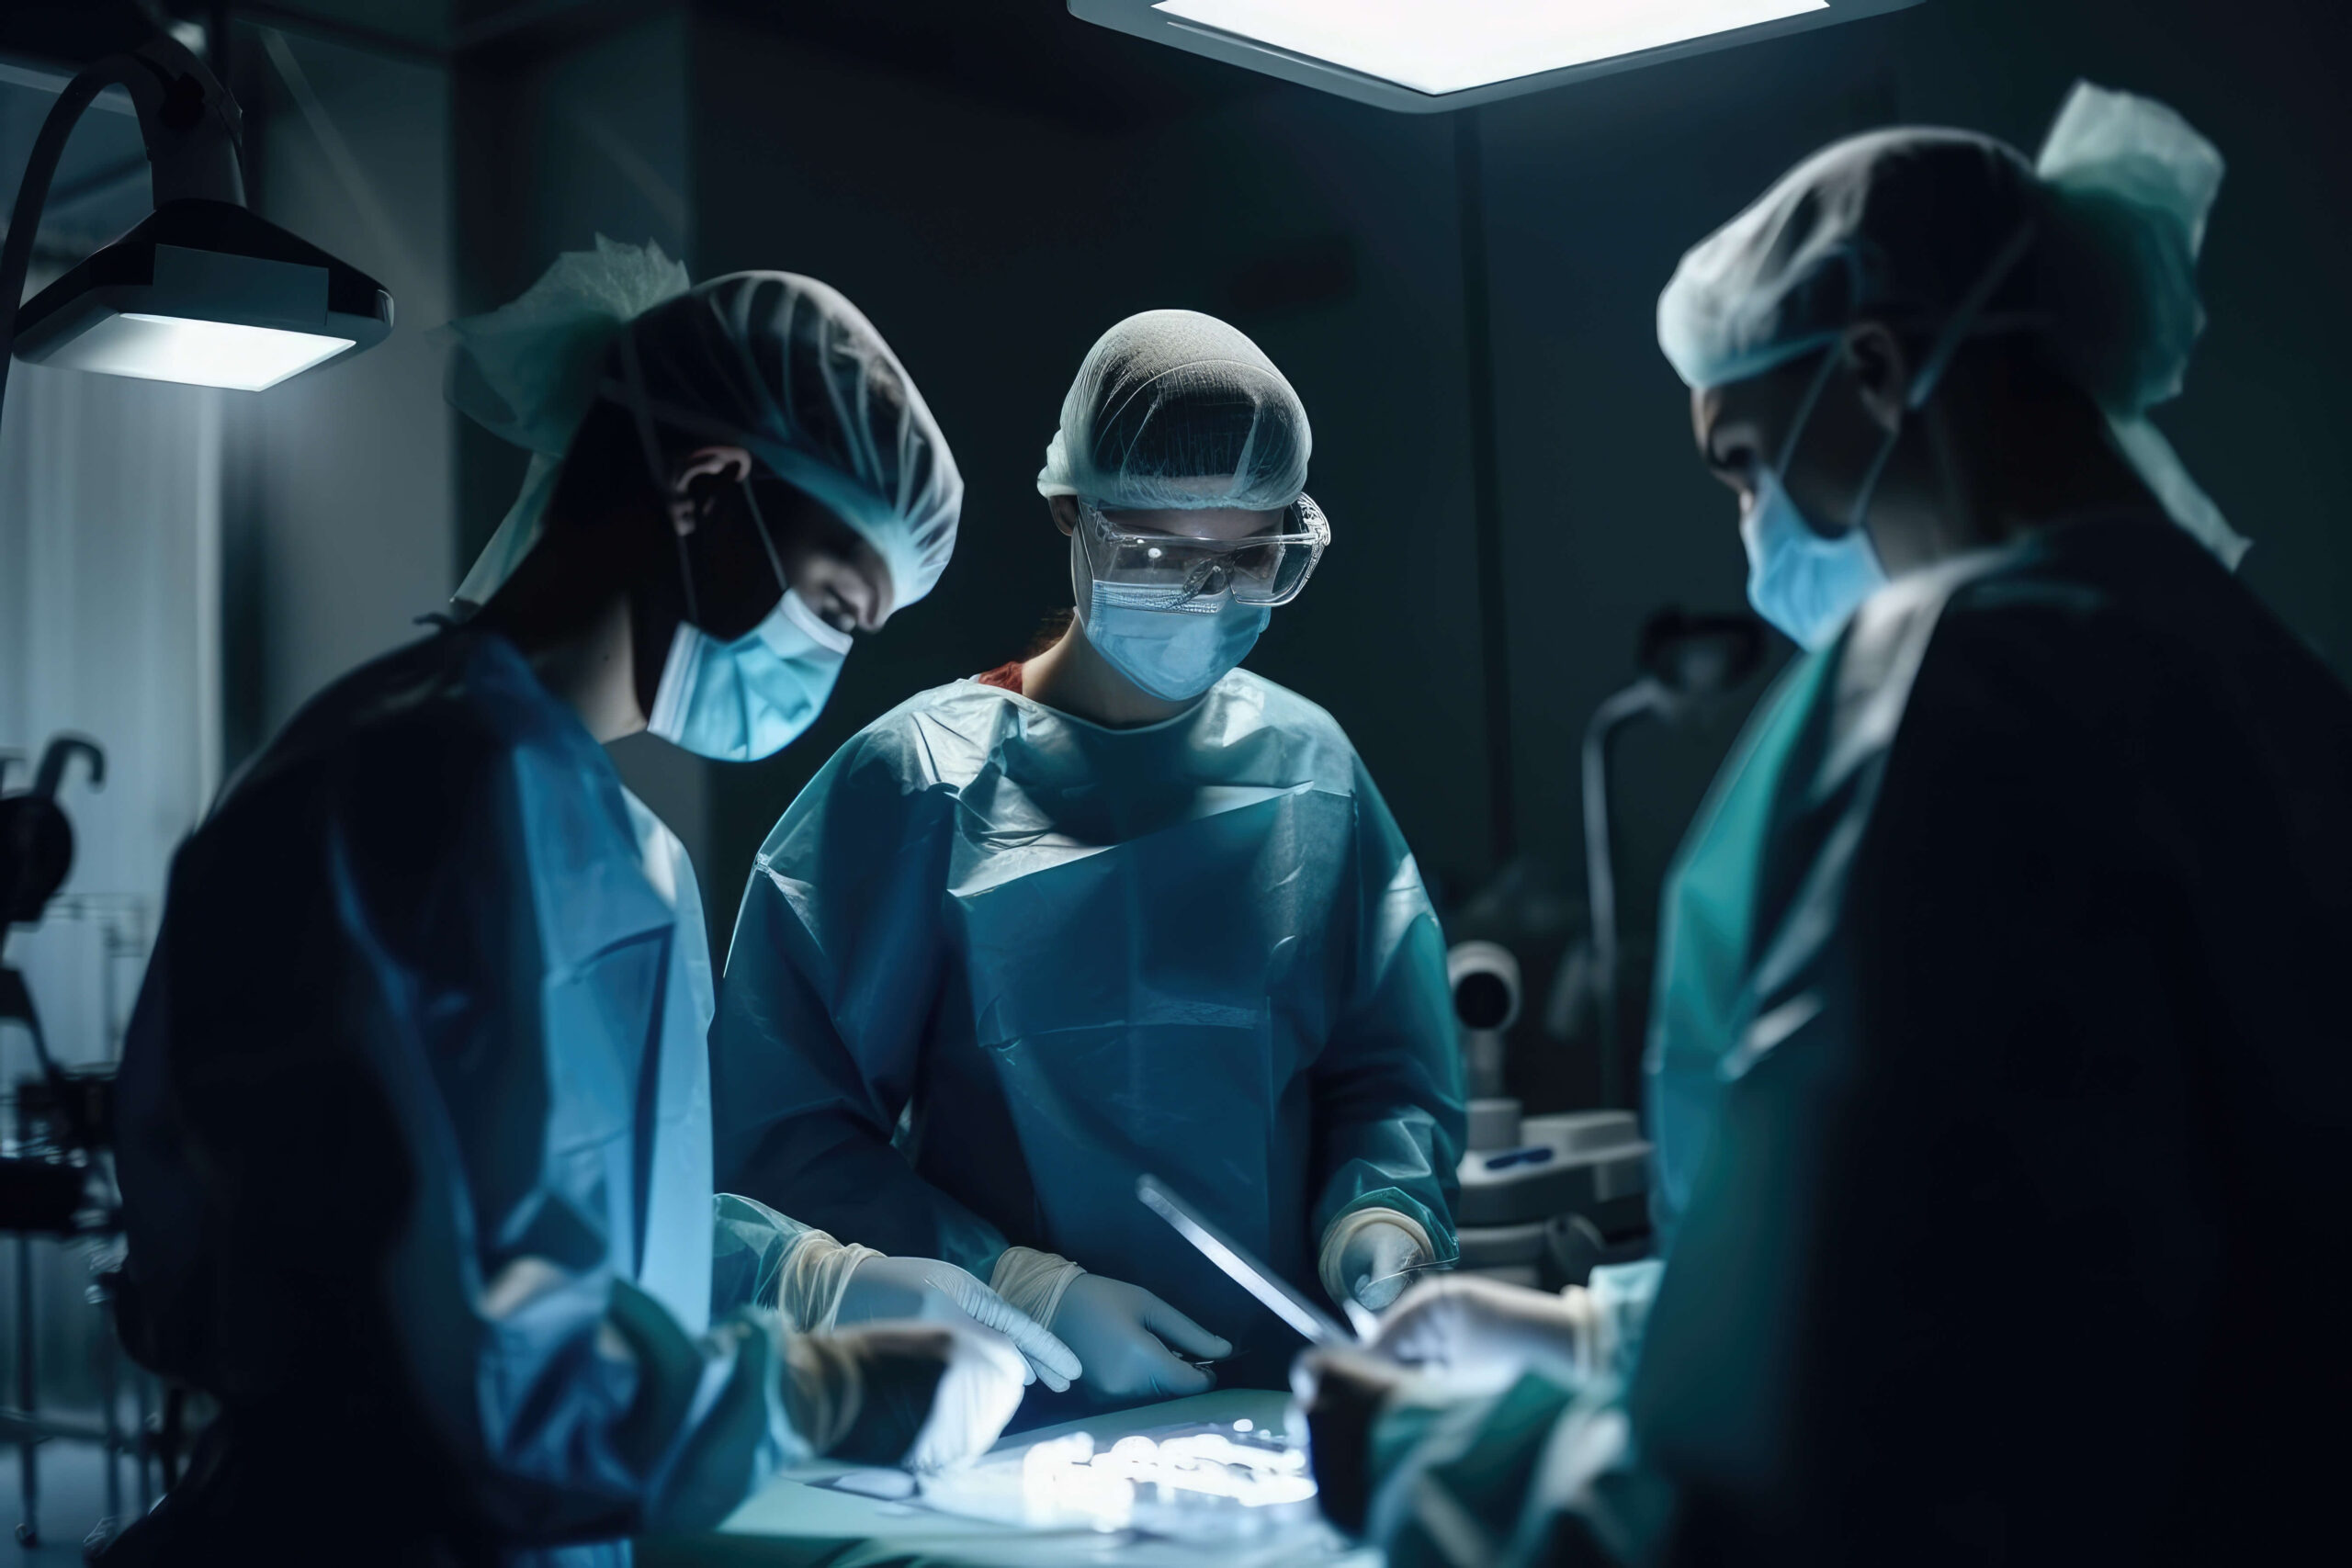 A team of surgeons in blue scrubs are operating on a patient.